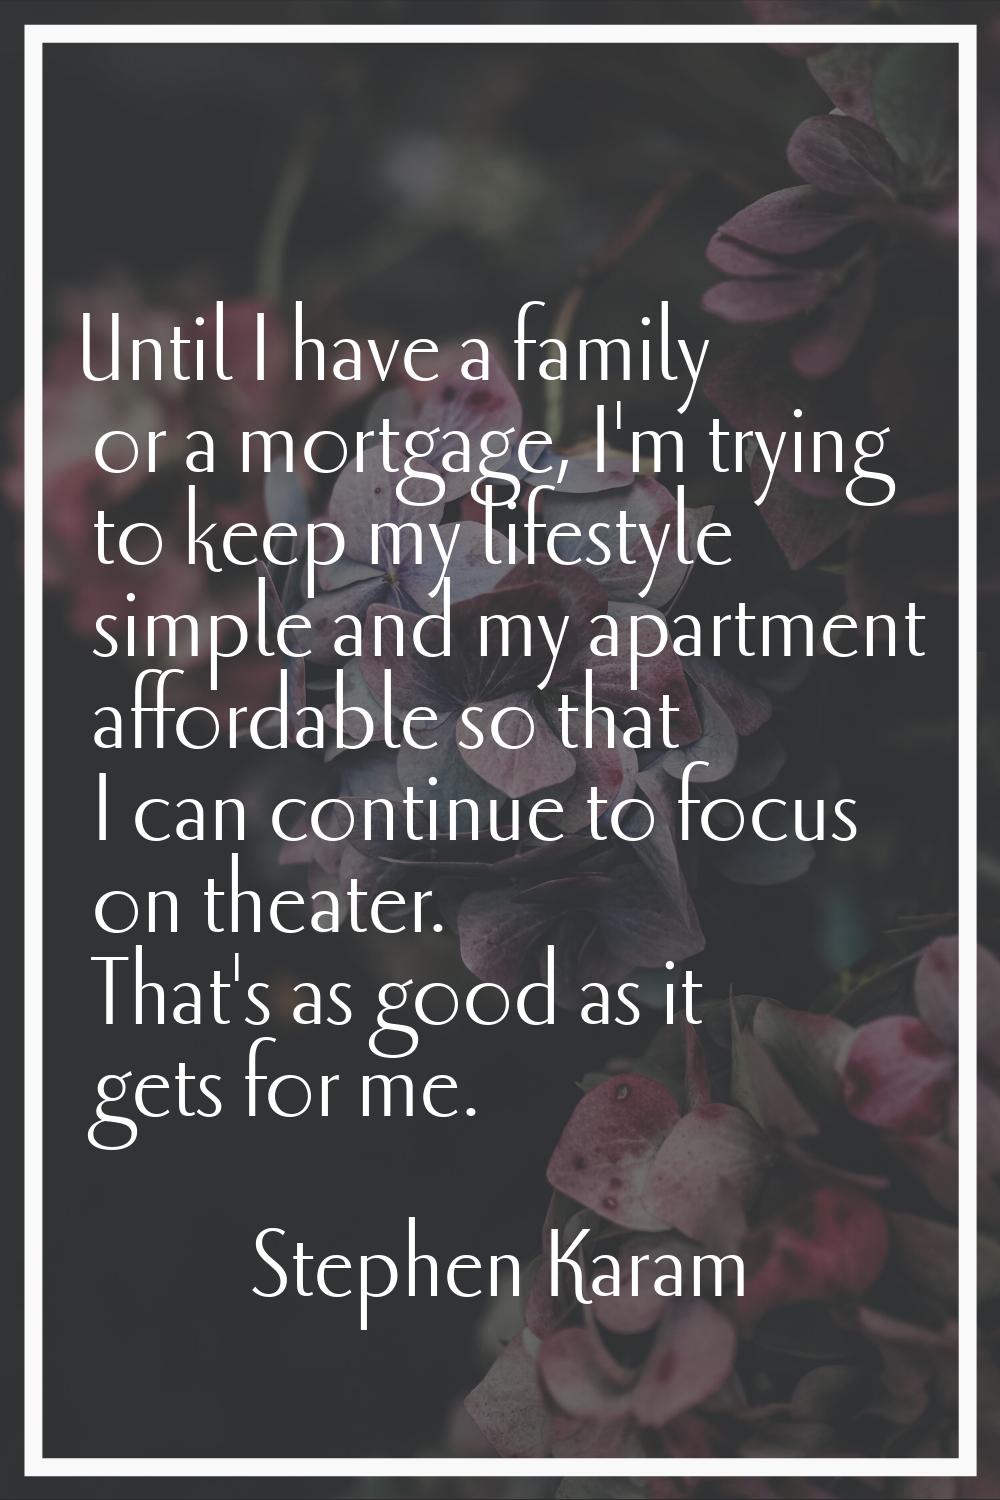 Until I have a family or a mortgage, I'm trying to keep my lifestyle simple and my apartment afford